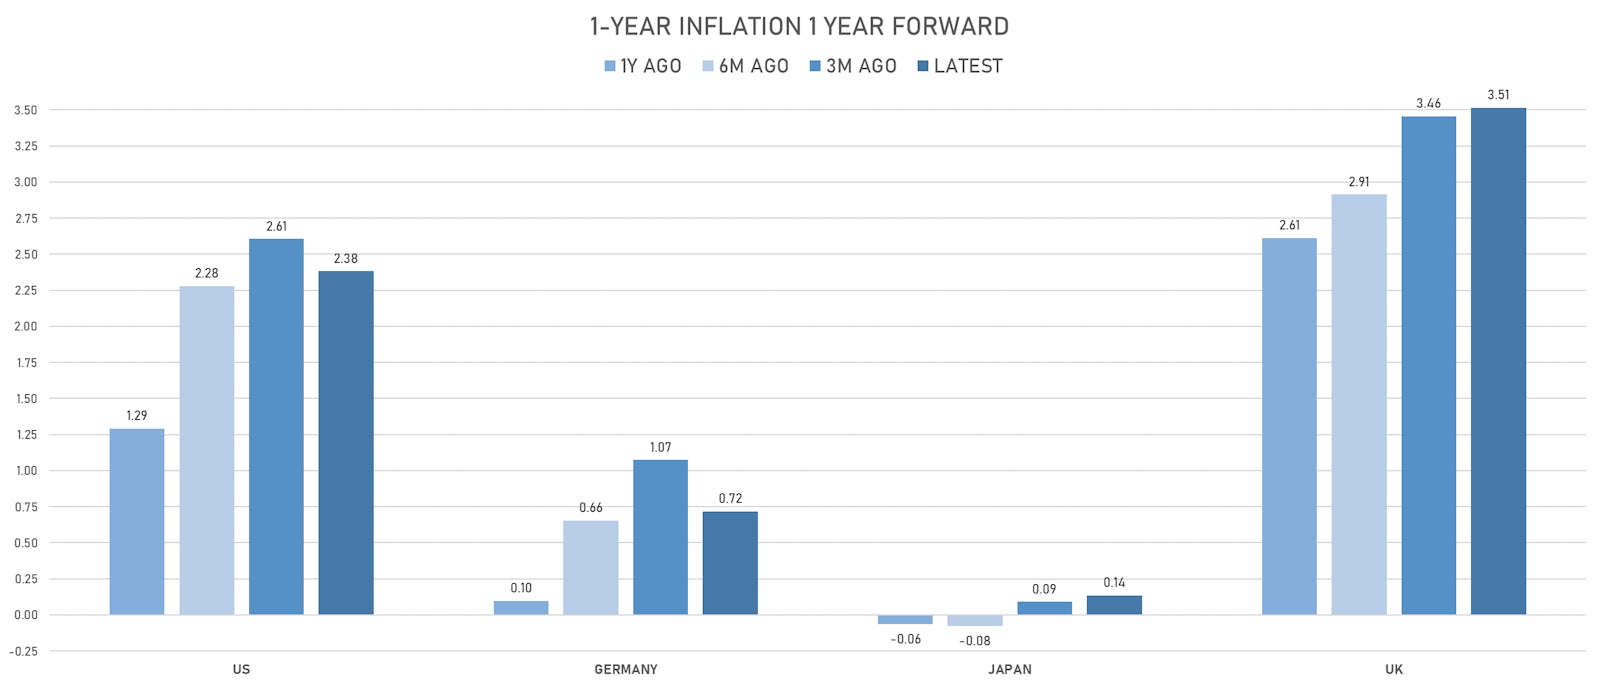 One-year forward 1-year inflation rates in major countries | Sources: ϕpost, Refinitiv data